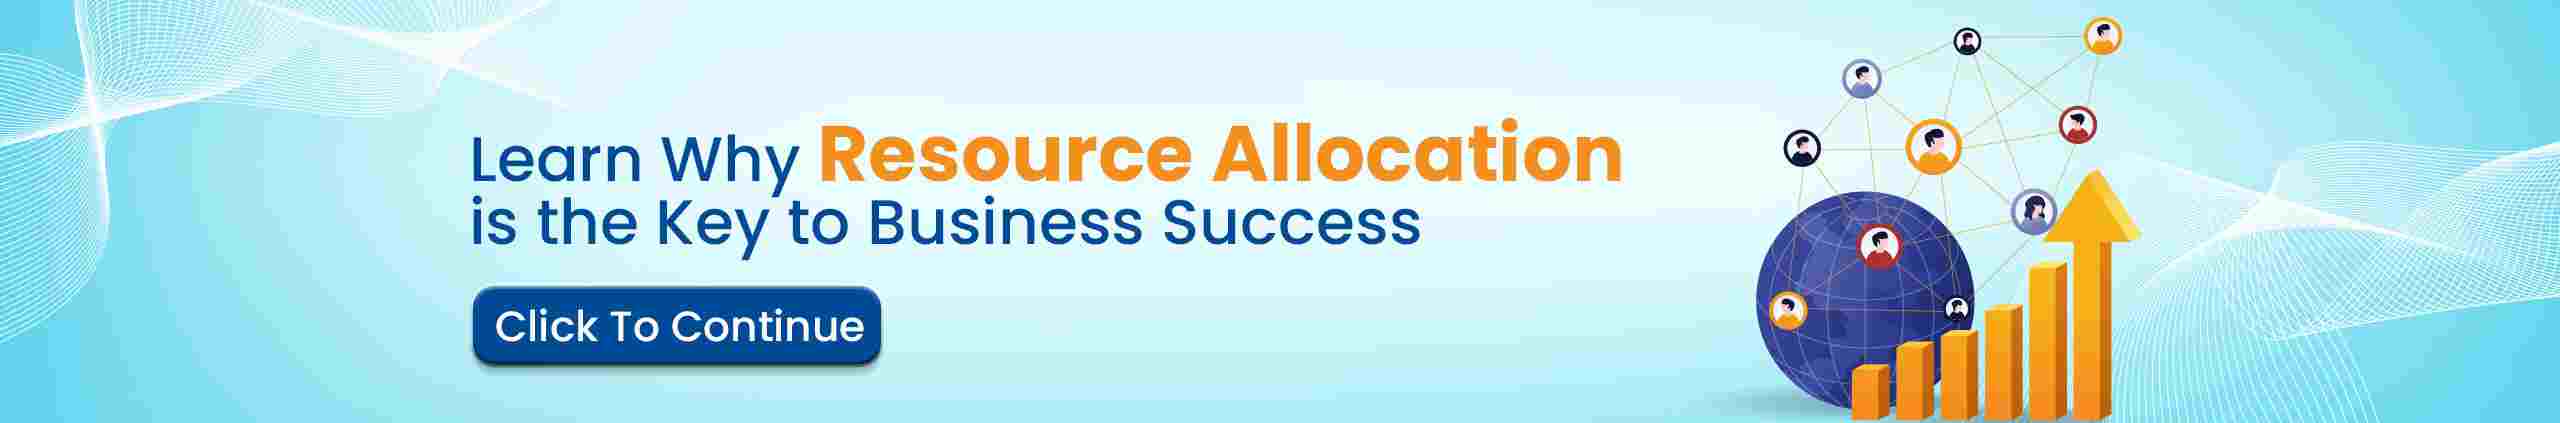 Learn why resource allocation is the key to business success